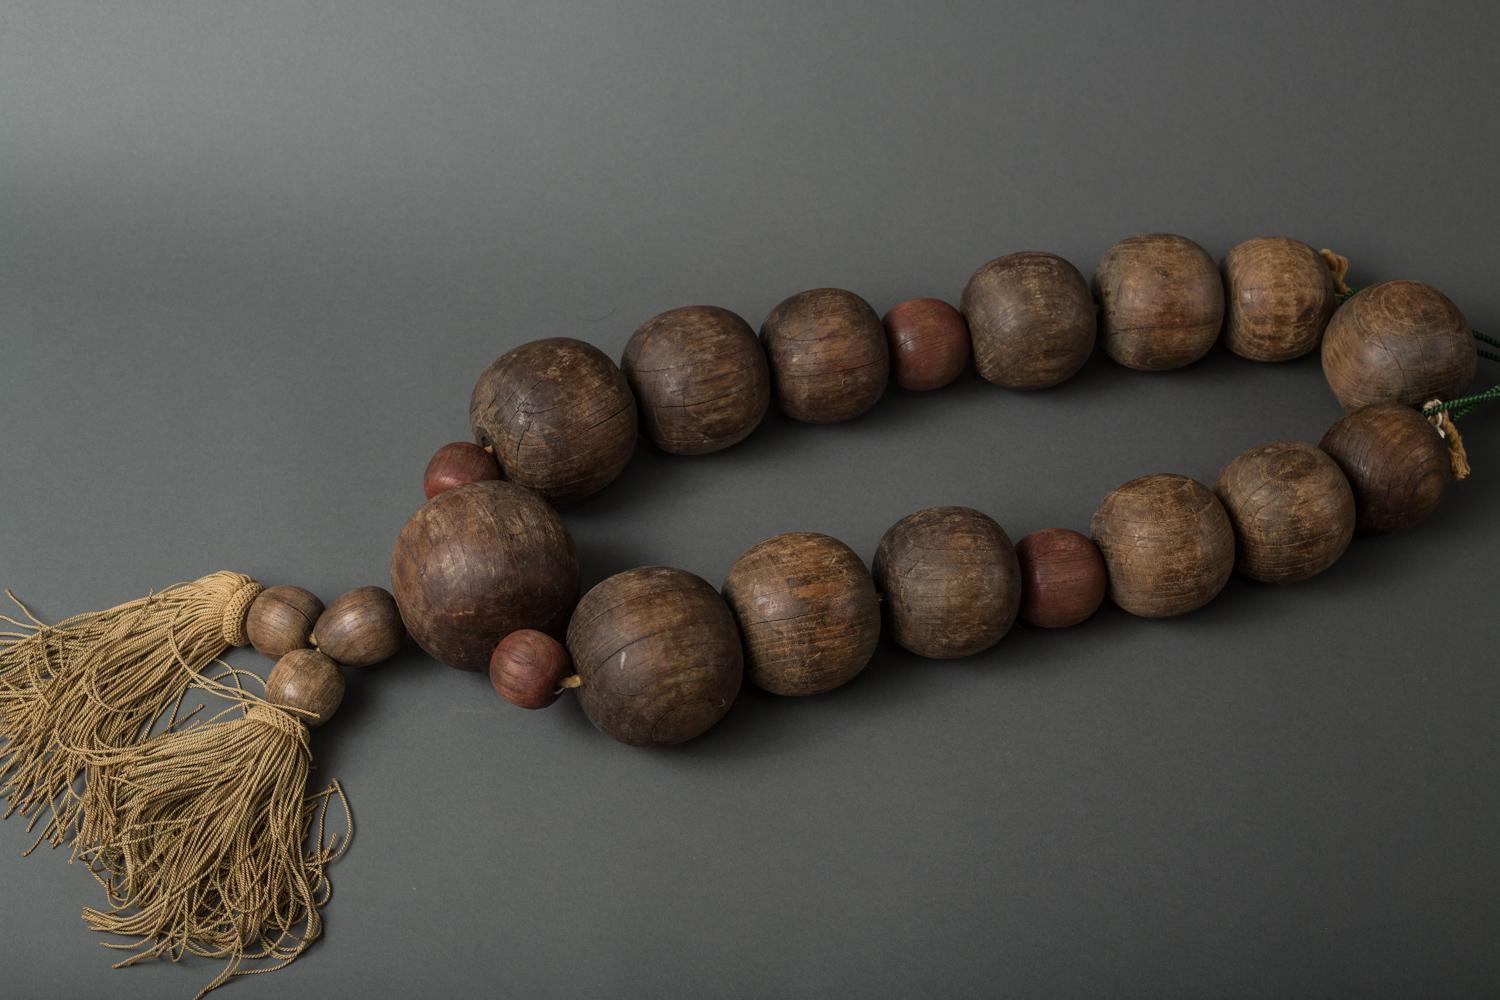 Large sculpture of prayer beads used as a shop sign. Can be displayed flat or hung on a wall.